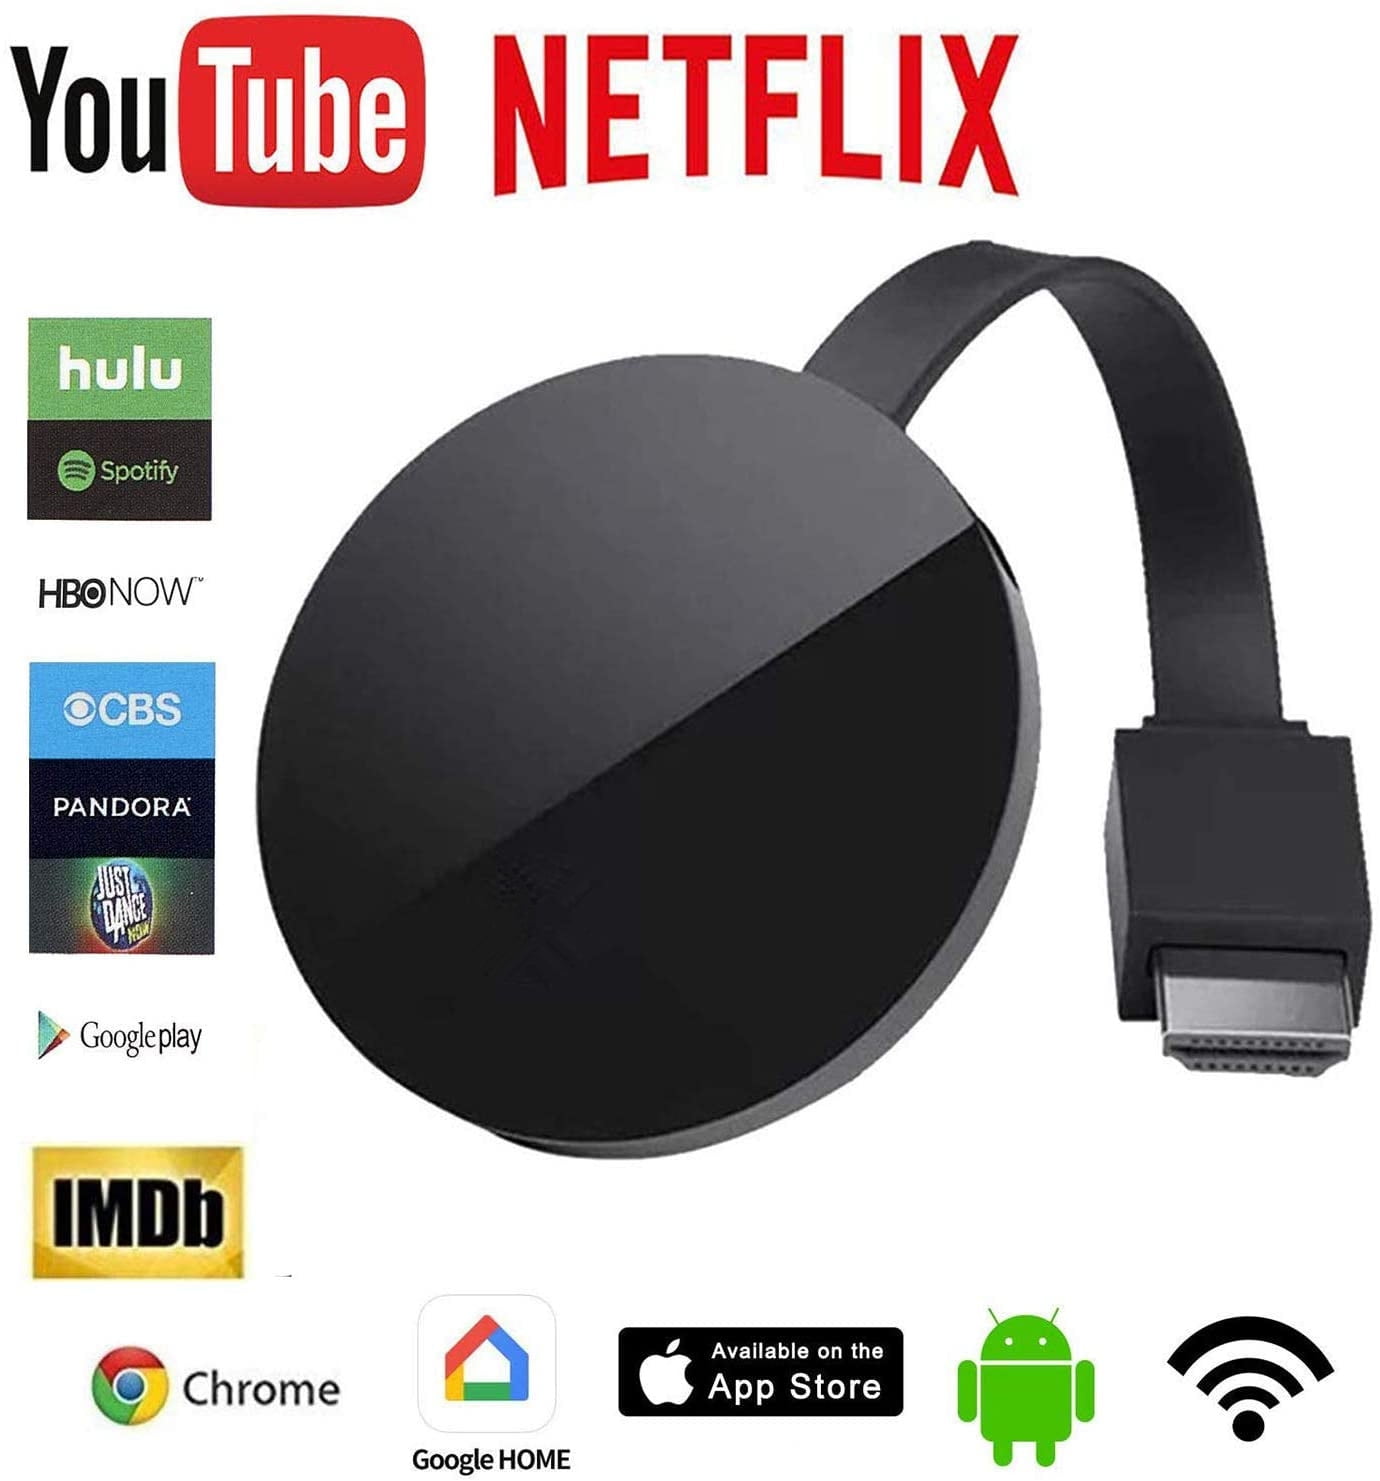 Compatible with i-OS/Android/Pixel/Nexus/Mac/Windows Support Miracast DLAN Airplay WiFi Display Dongle,Wireless HDMI Display Dongle Adapter 4K HD for Big Screen